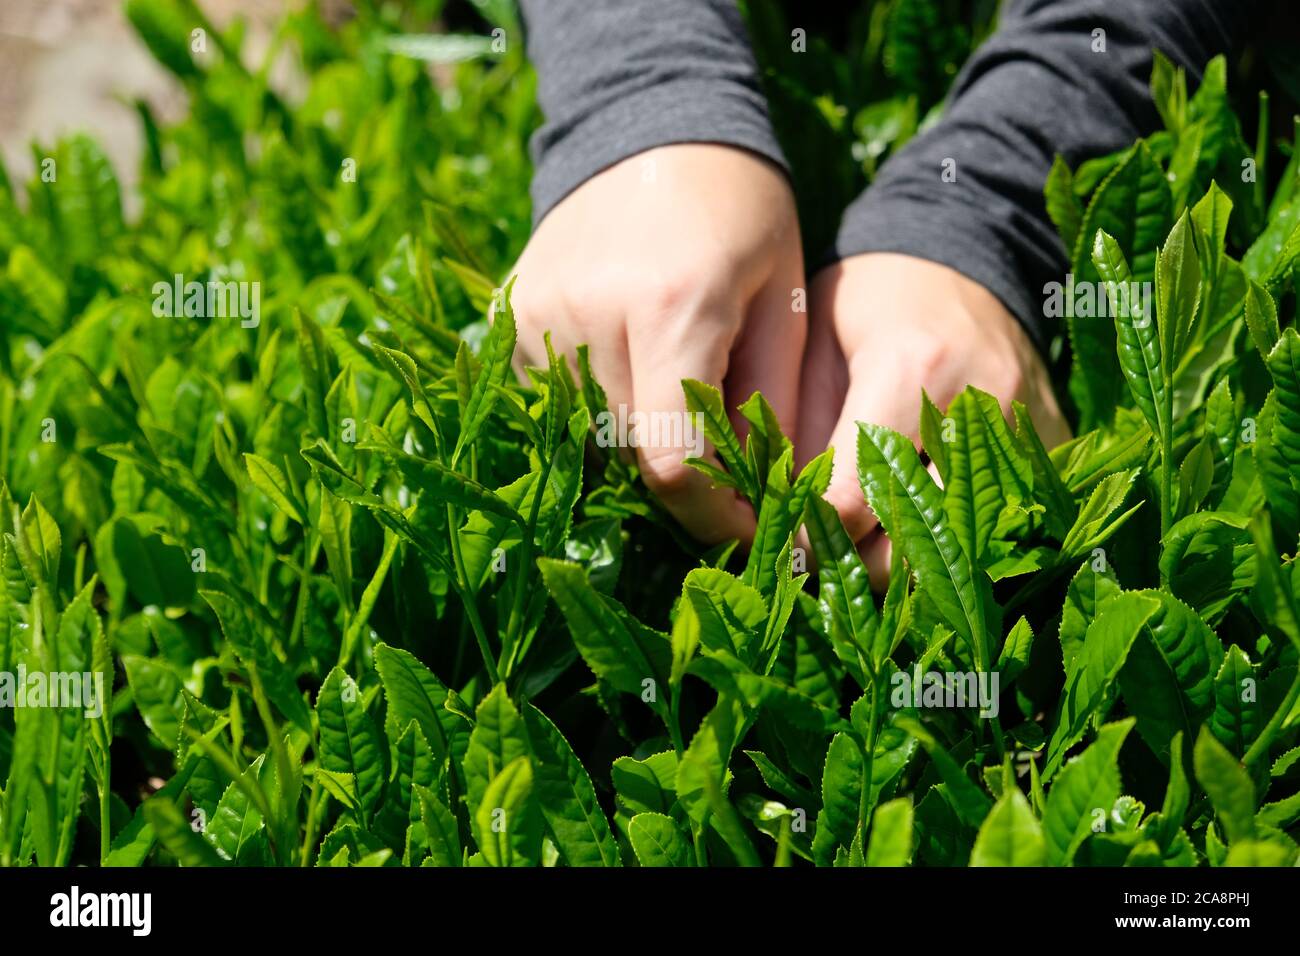 The best quality Japanese green tea leaves are hand-picked during harvest season. Shizuoka is one of the major tea production prefecture in Japan. Stock Photo